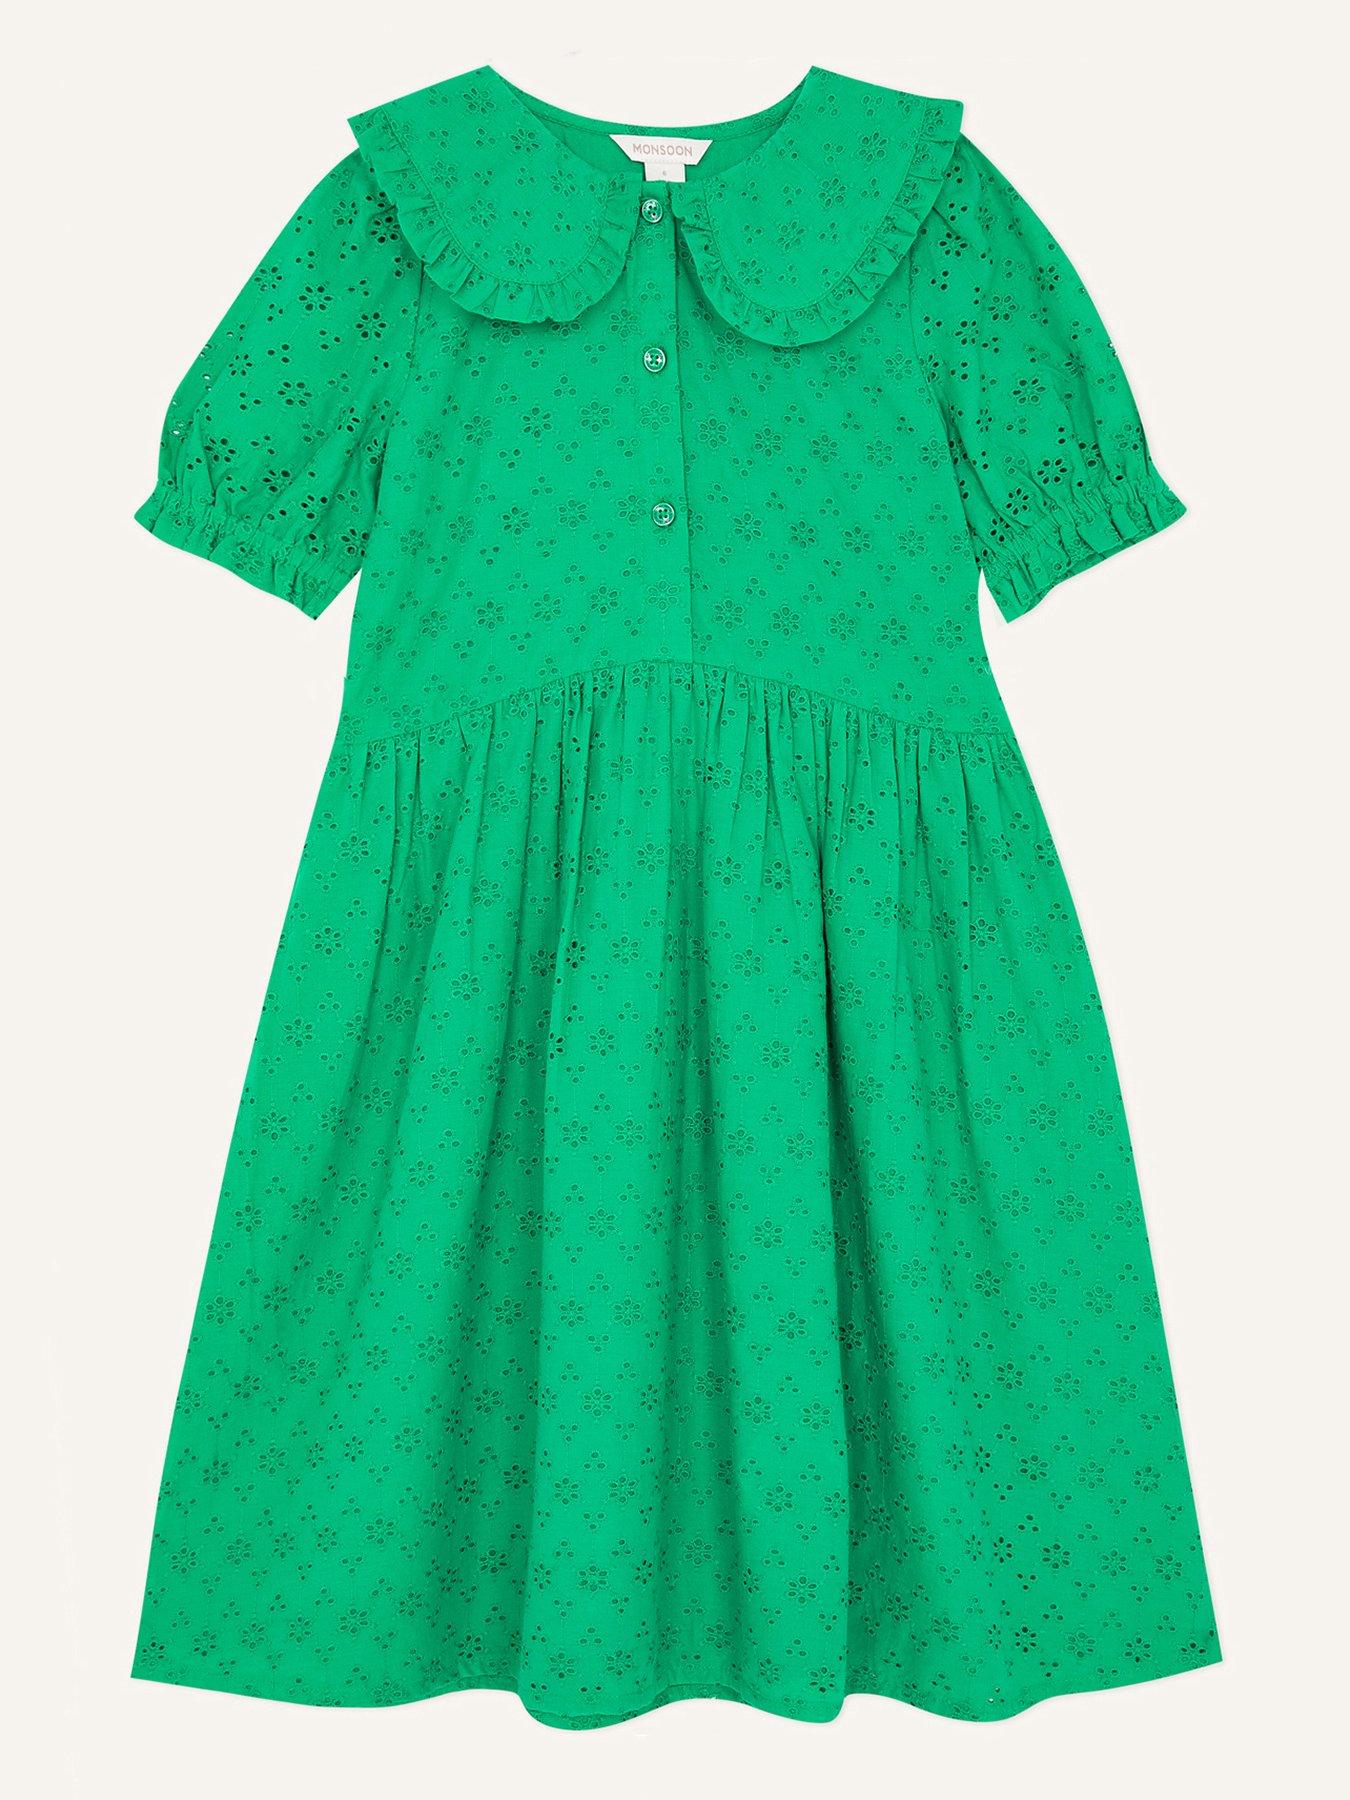  Girls S.e.w. Broderie Dress With Collar - Green